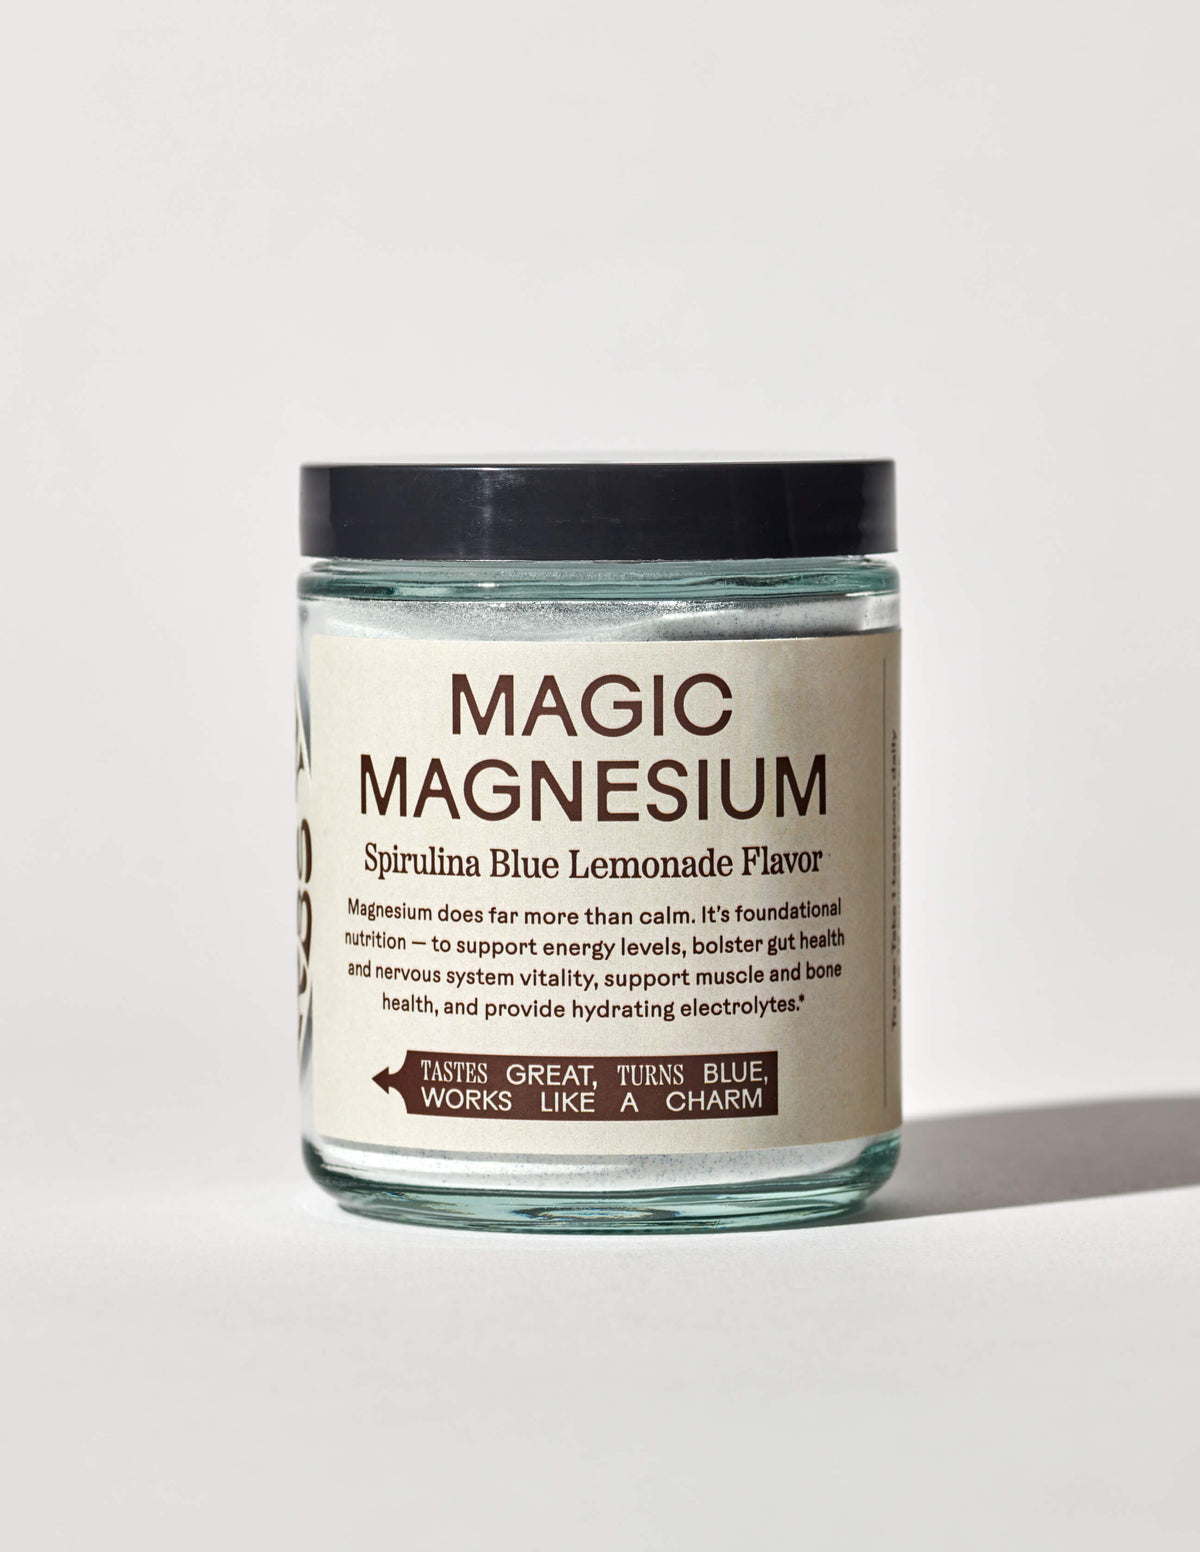 Magic Magnesium by Wooden Spoon Herbs